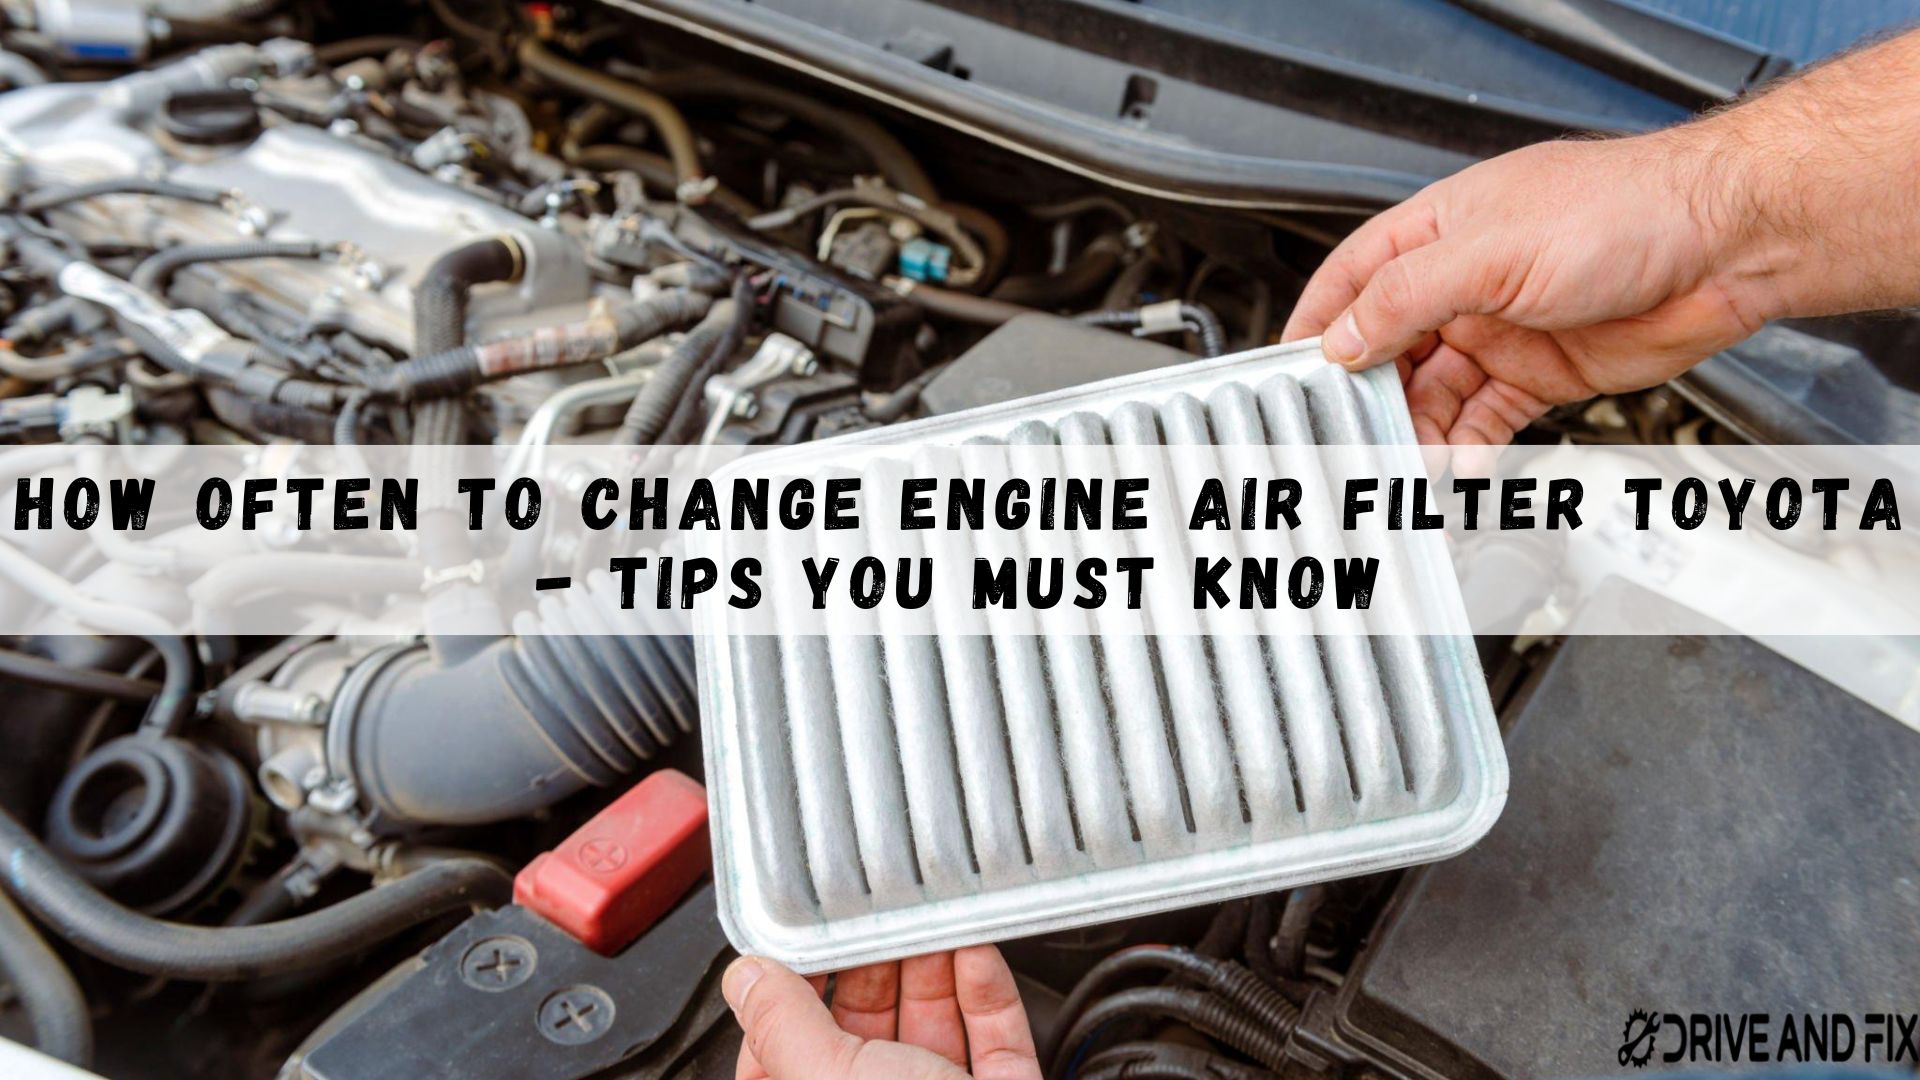 How often to change engine air filter Toyota